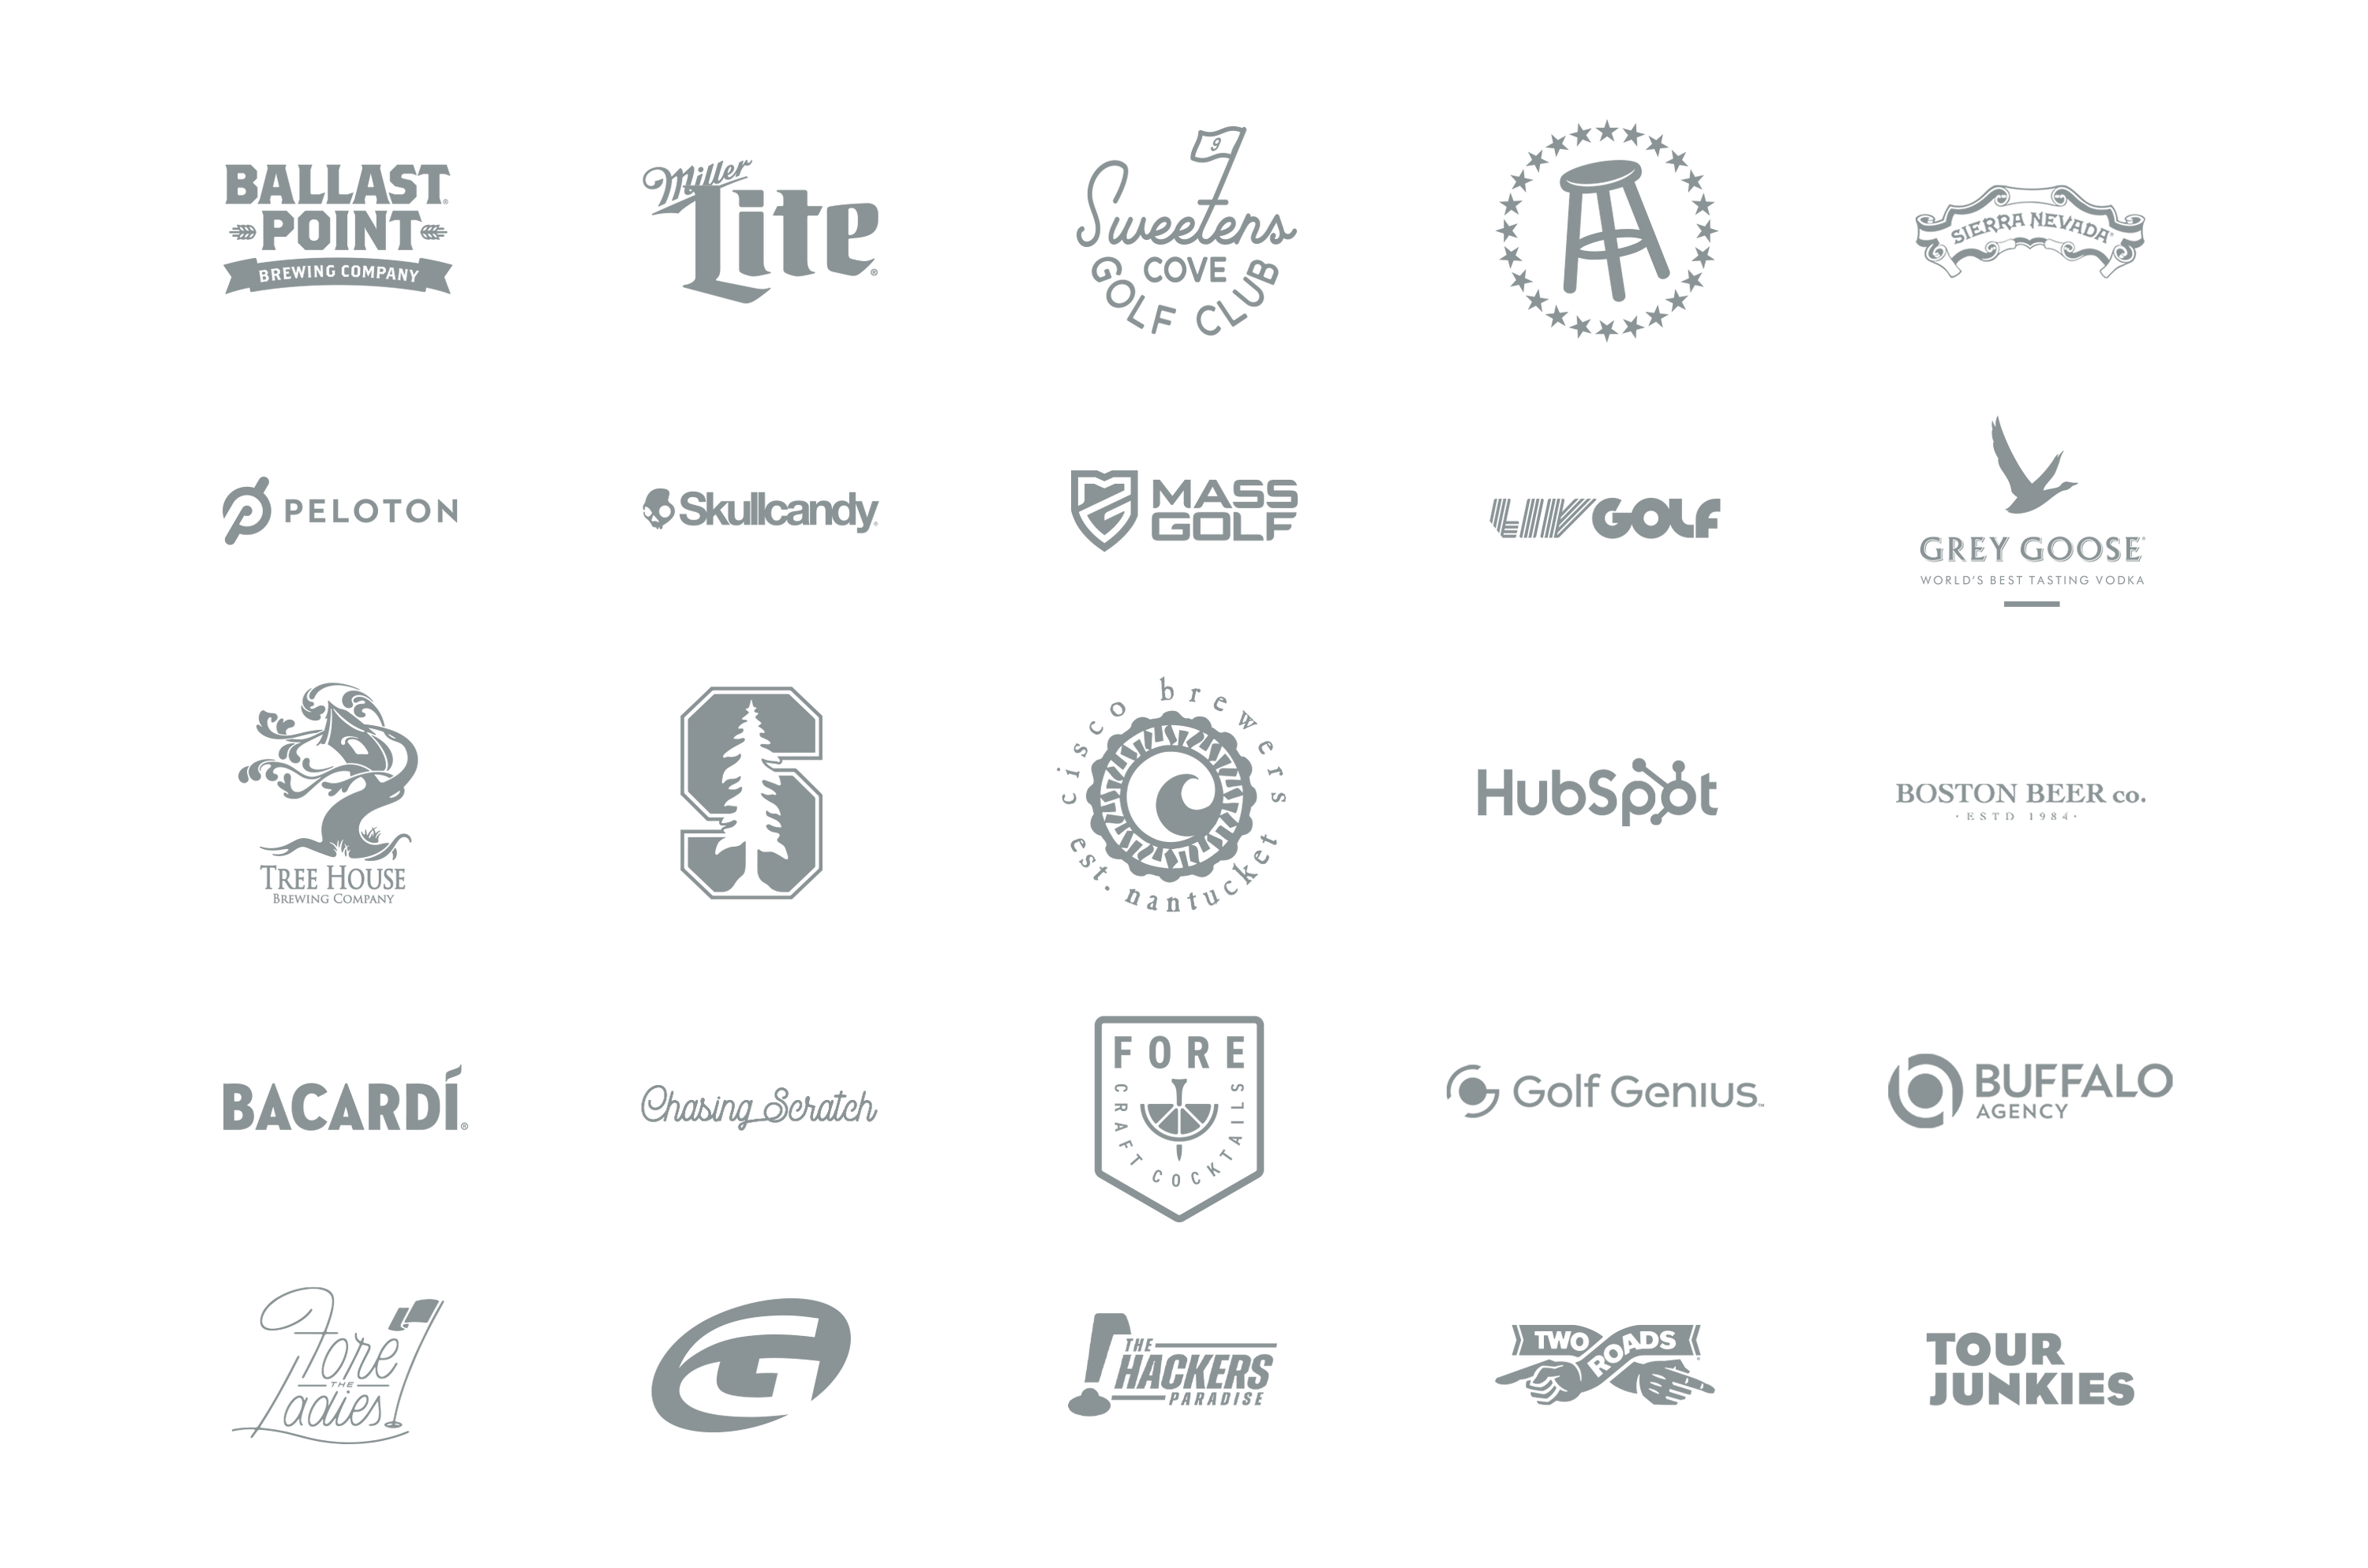 list of brand logos for the brands we have made custom golf head covers for